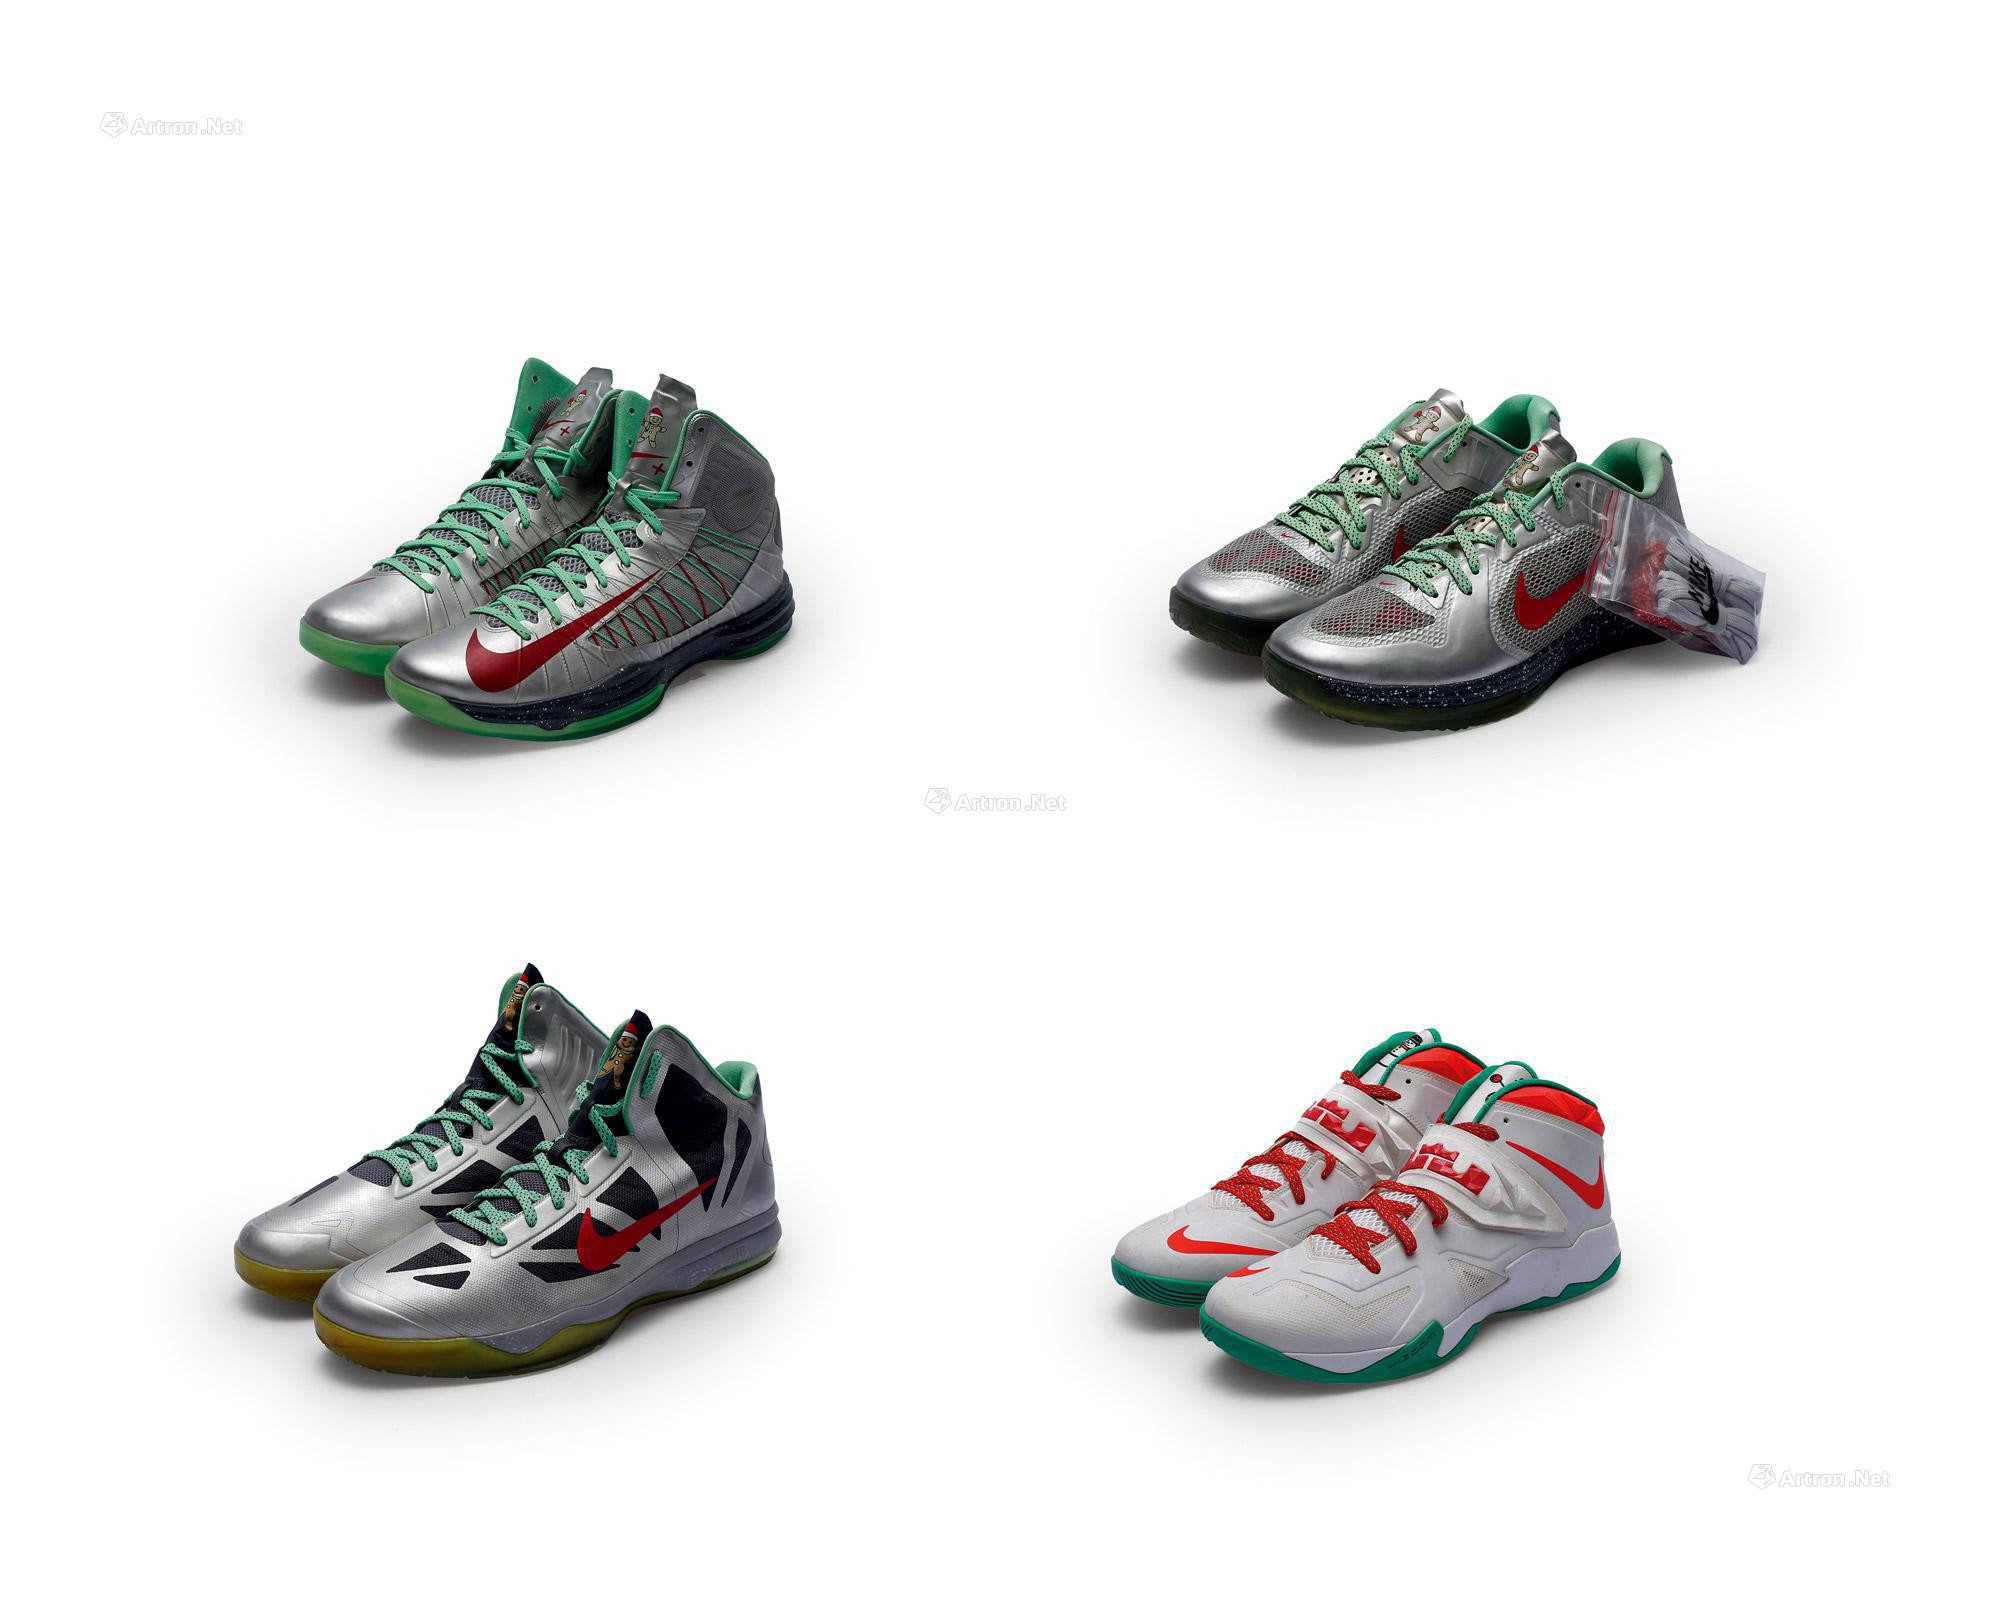 Chirstmas Game Exclusive Sneaker Collection  4 Pairs of Player Exclusive Sneakers